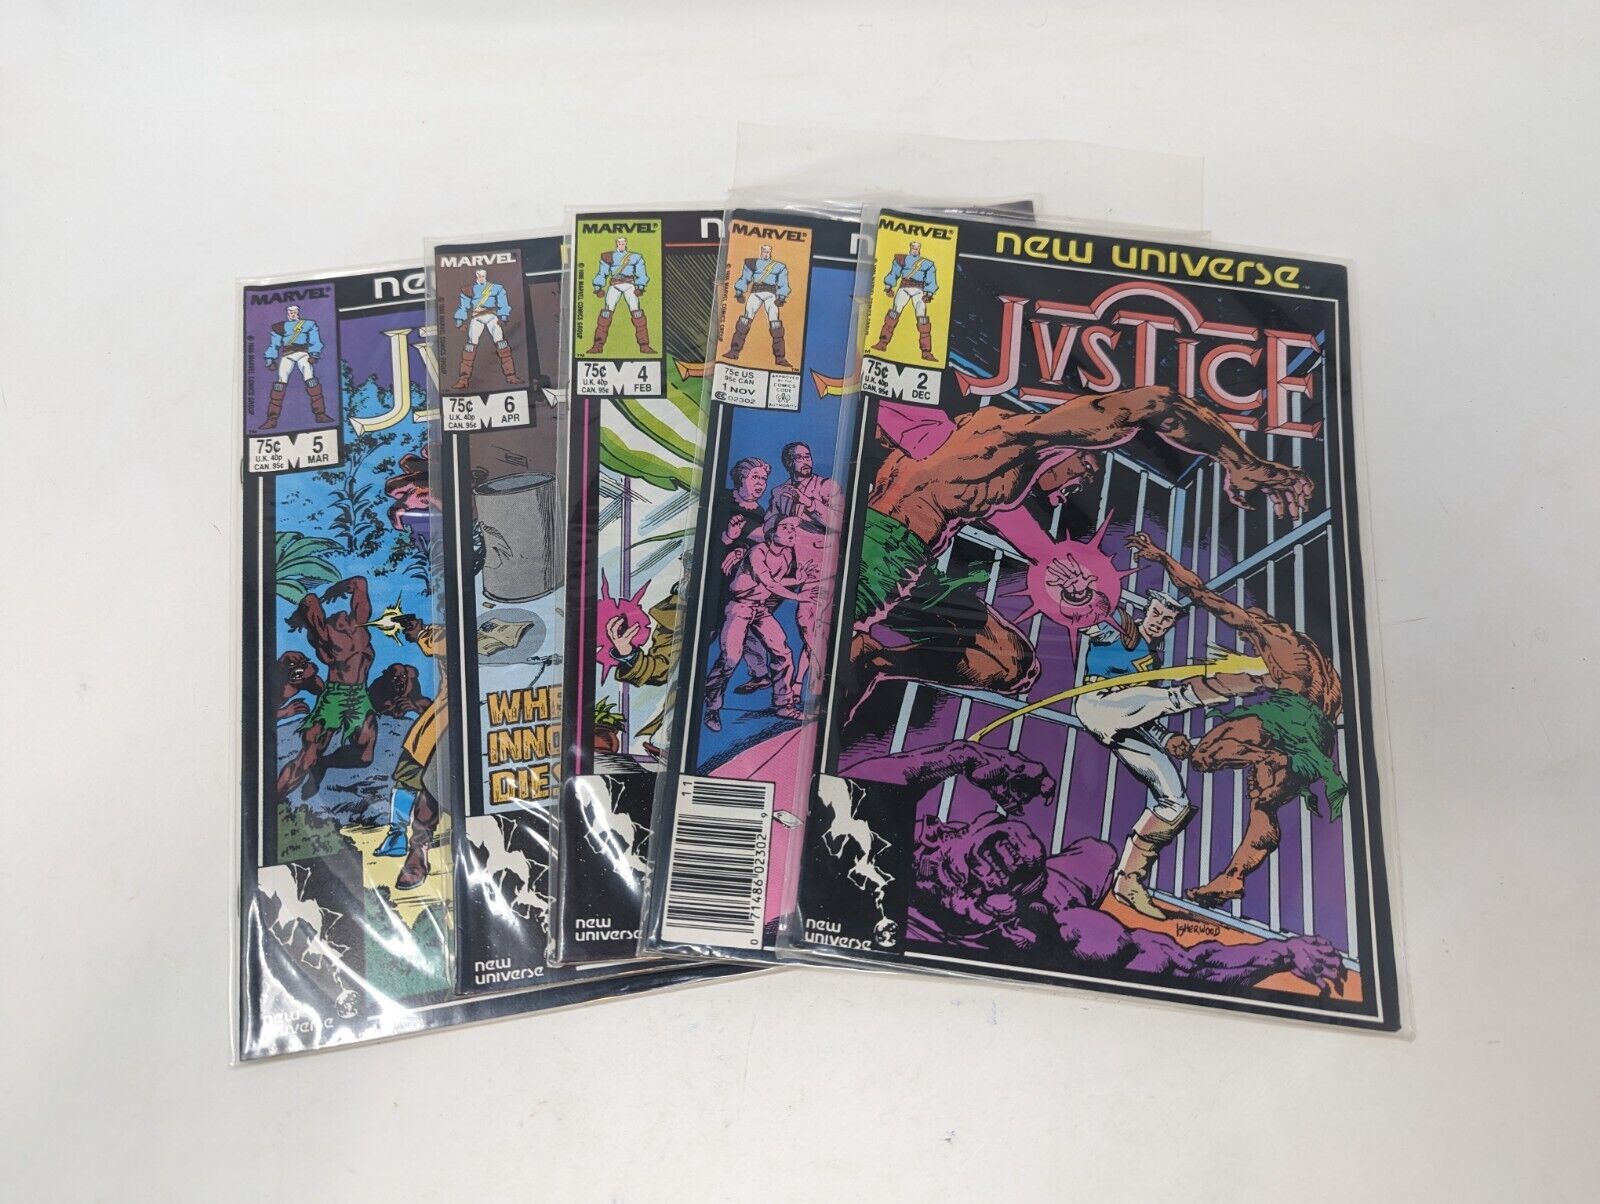 Justice Lot of 6 Marvel (1986) New Universe